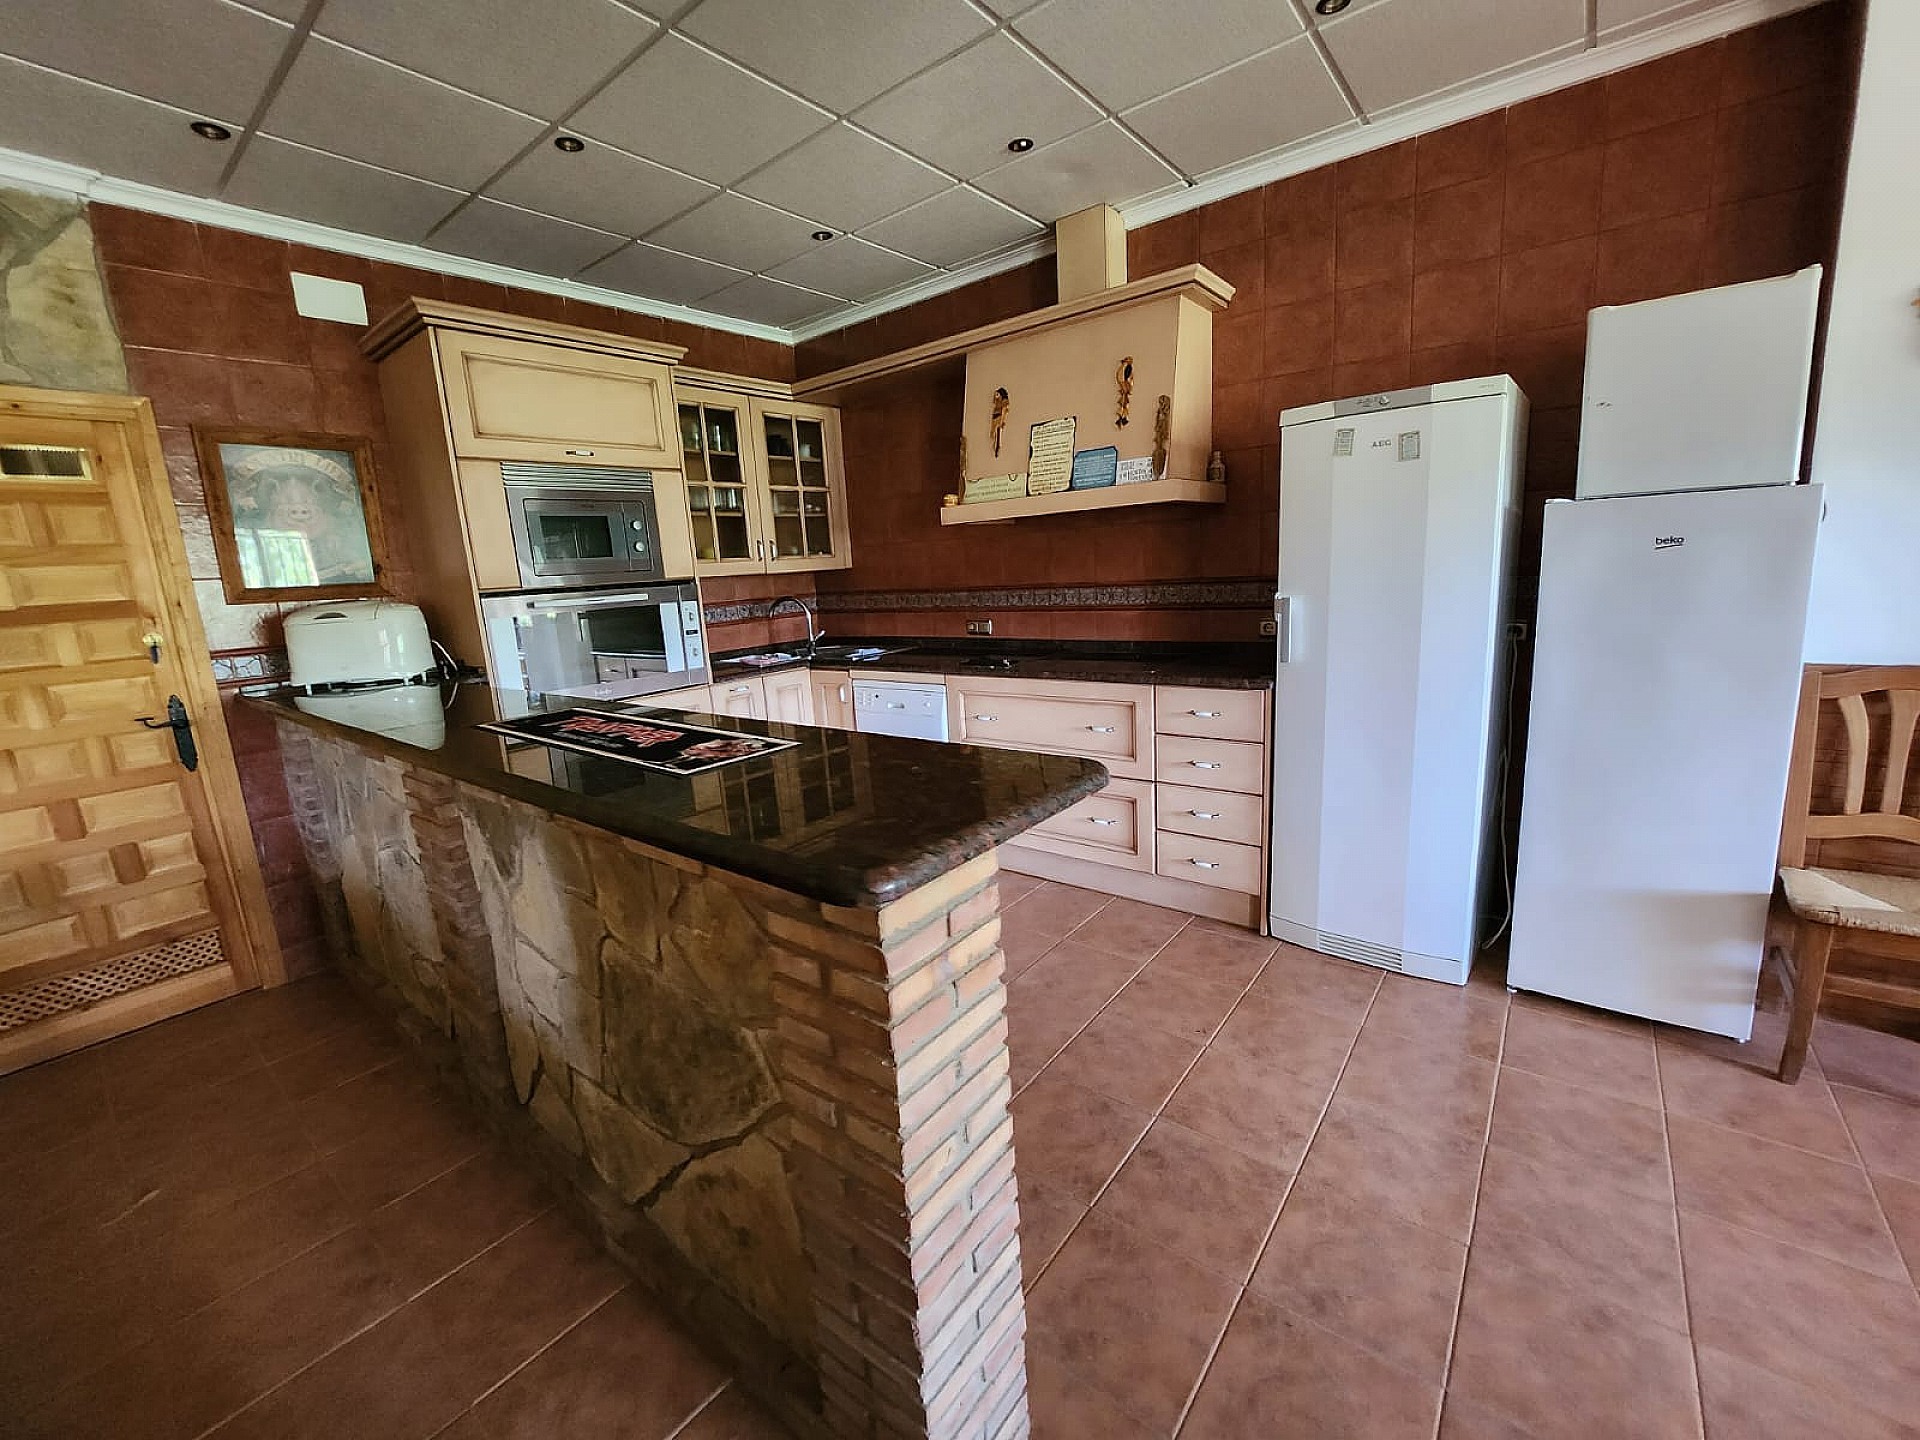 Countryhome for sale in Guardamar and surroundings 46